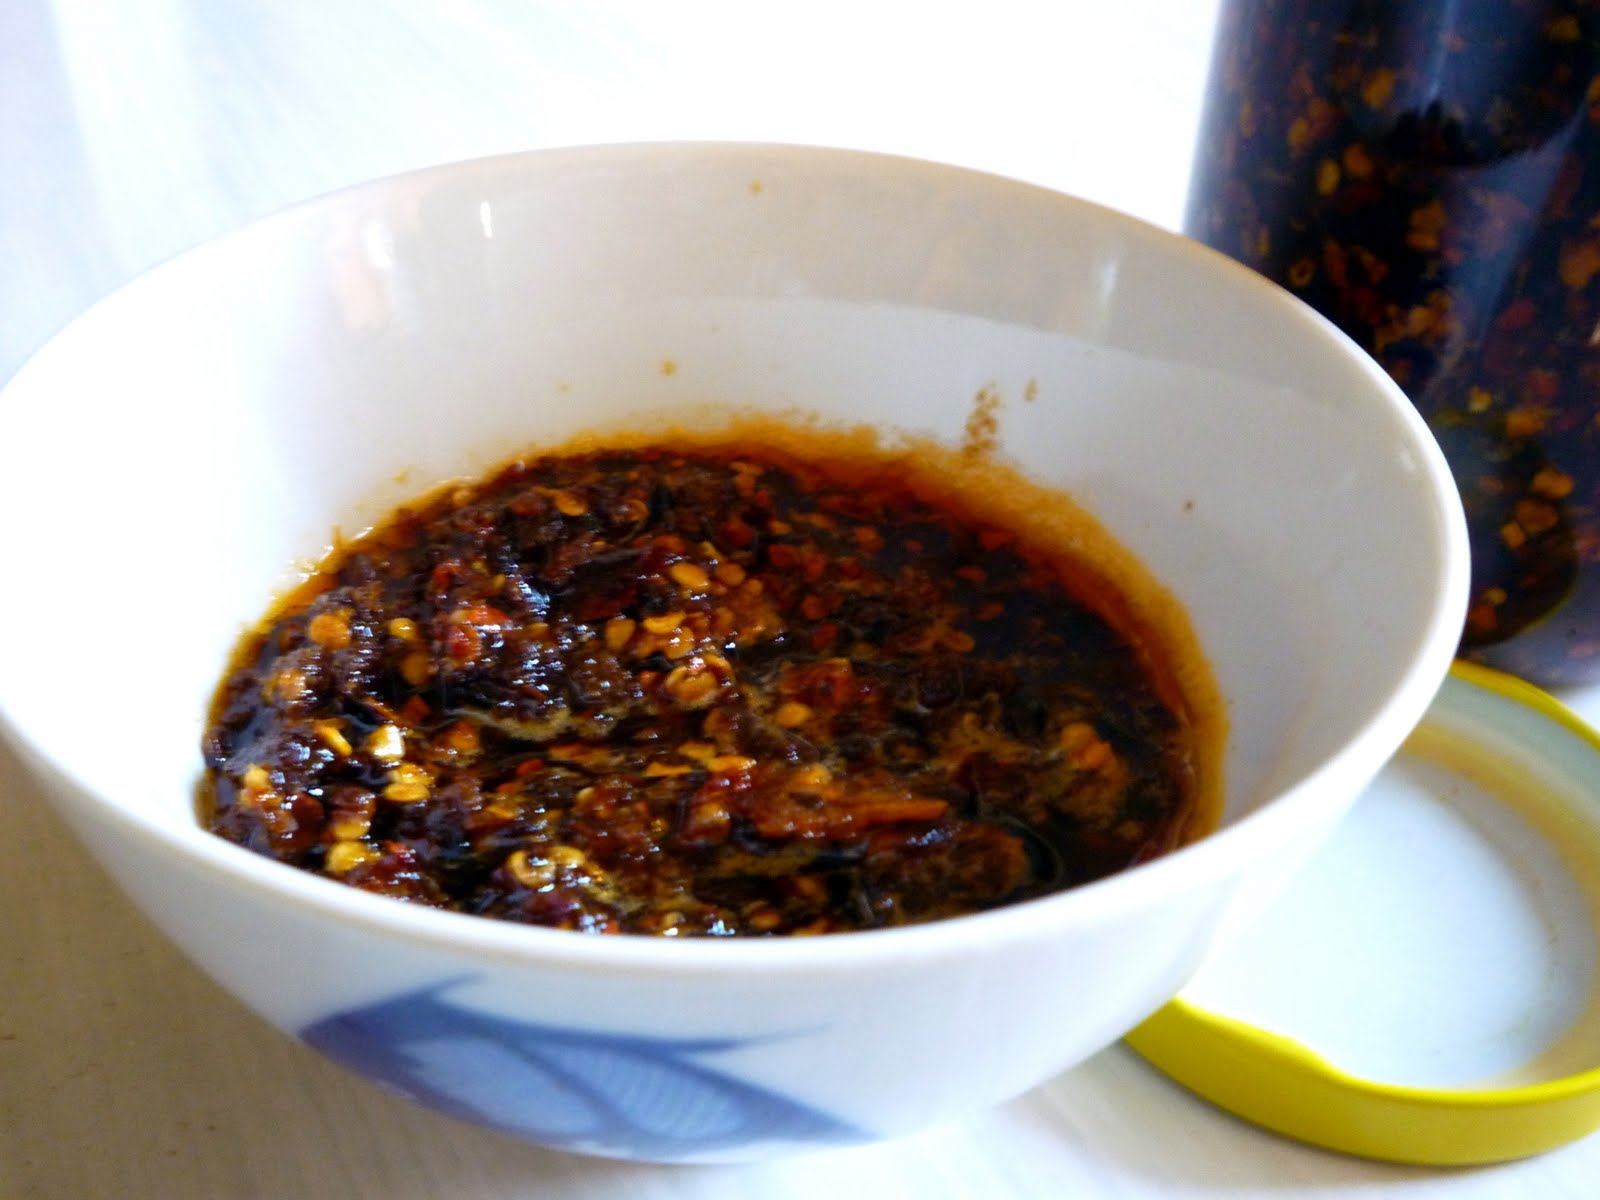 How to Make Chili Oil (辣椒油)